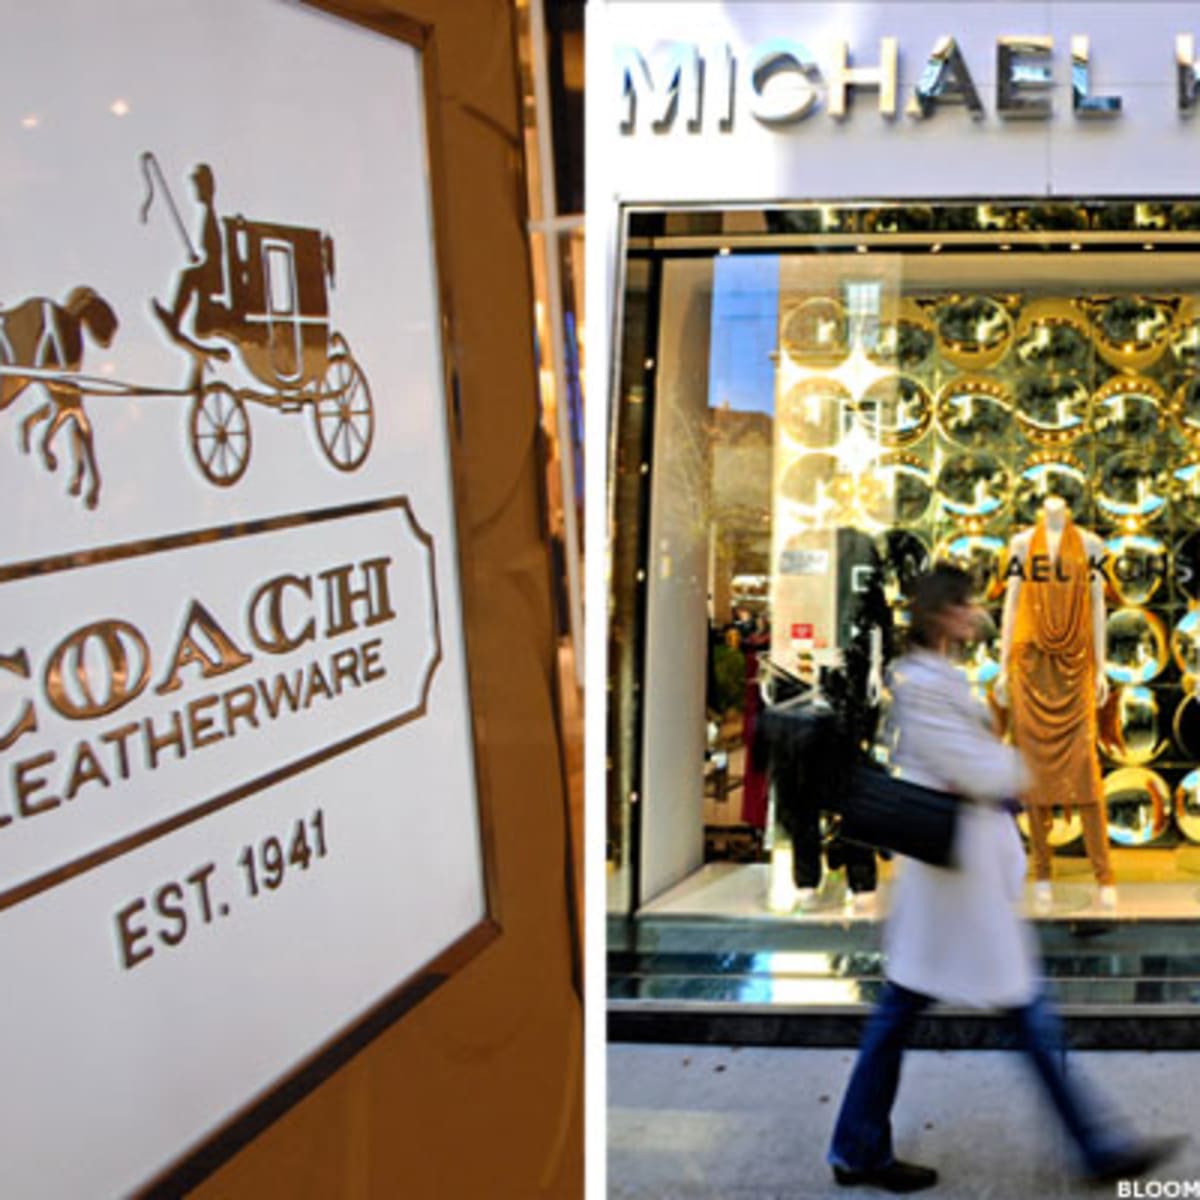 which is better michael kors or coach